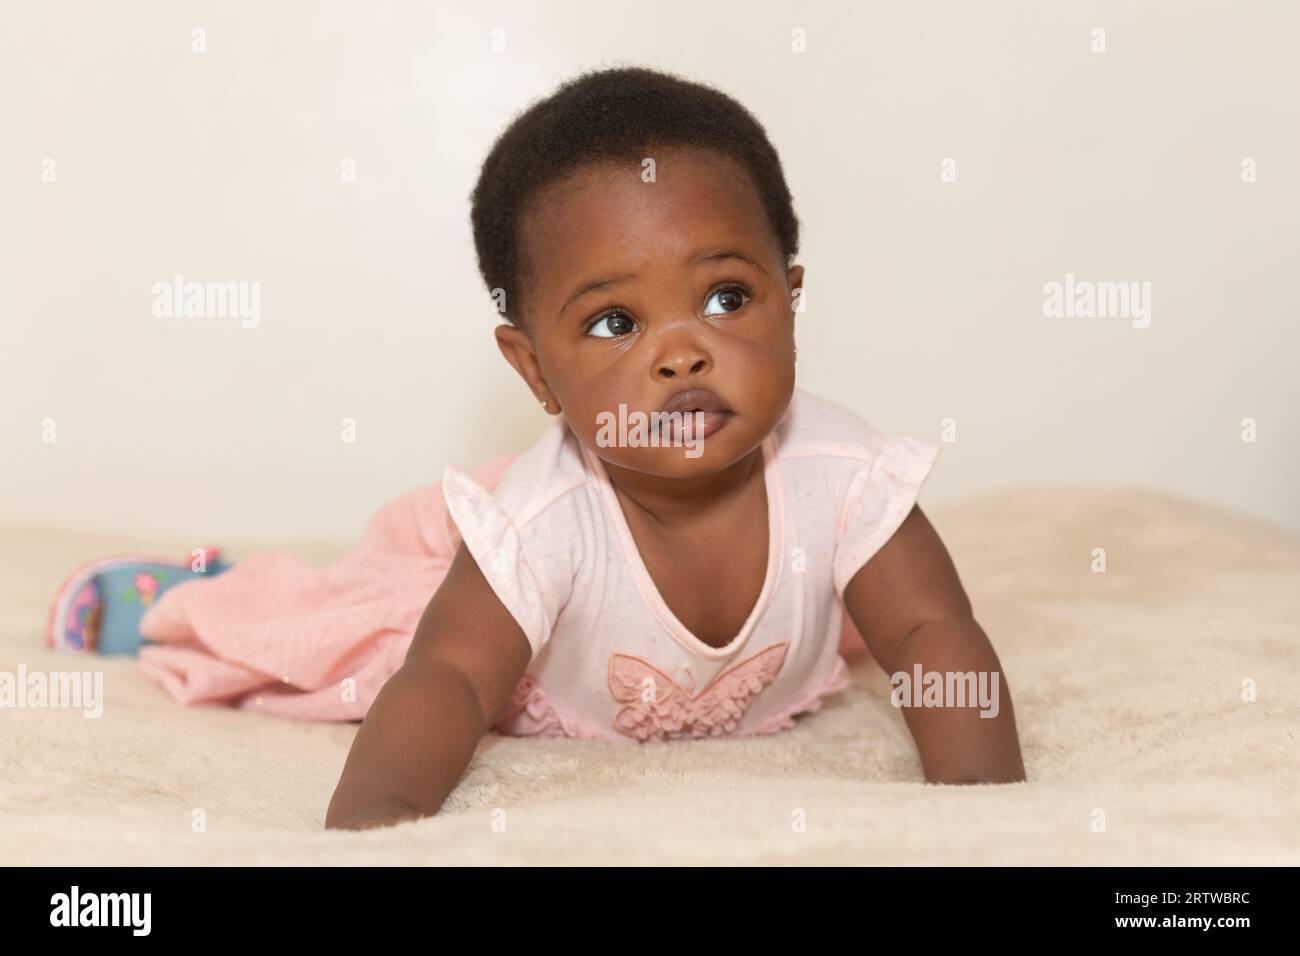 Portrait of a black baby girl with a serious expression dressed in pink crawling on a bed Stock Photo